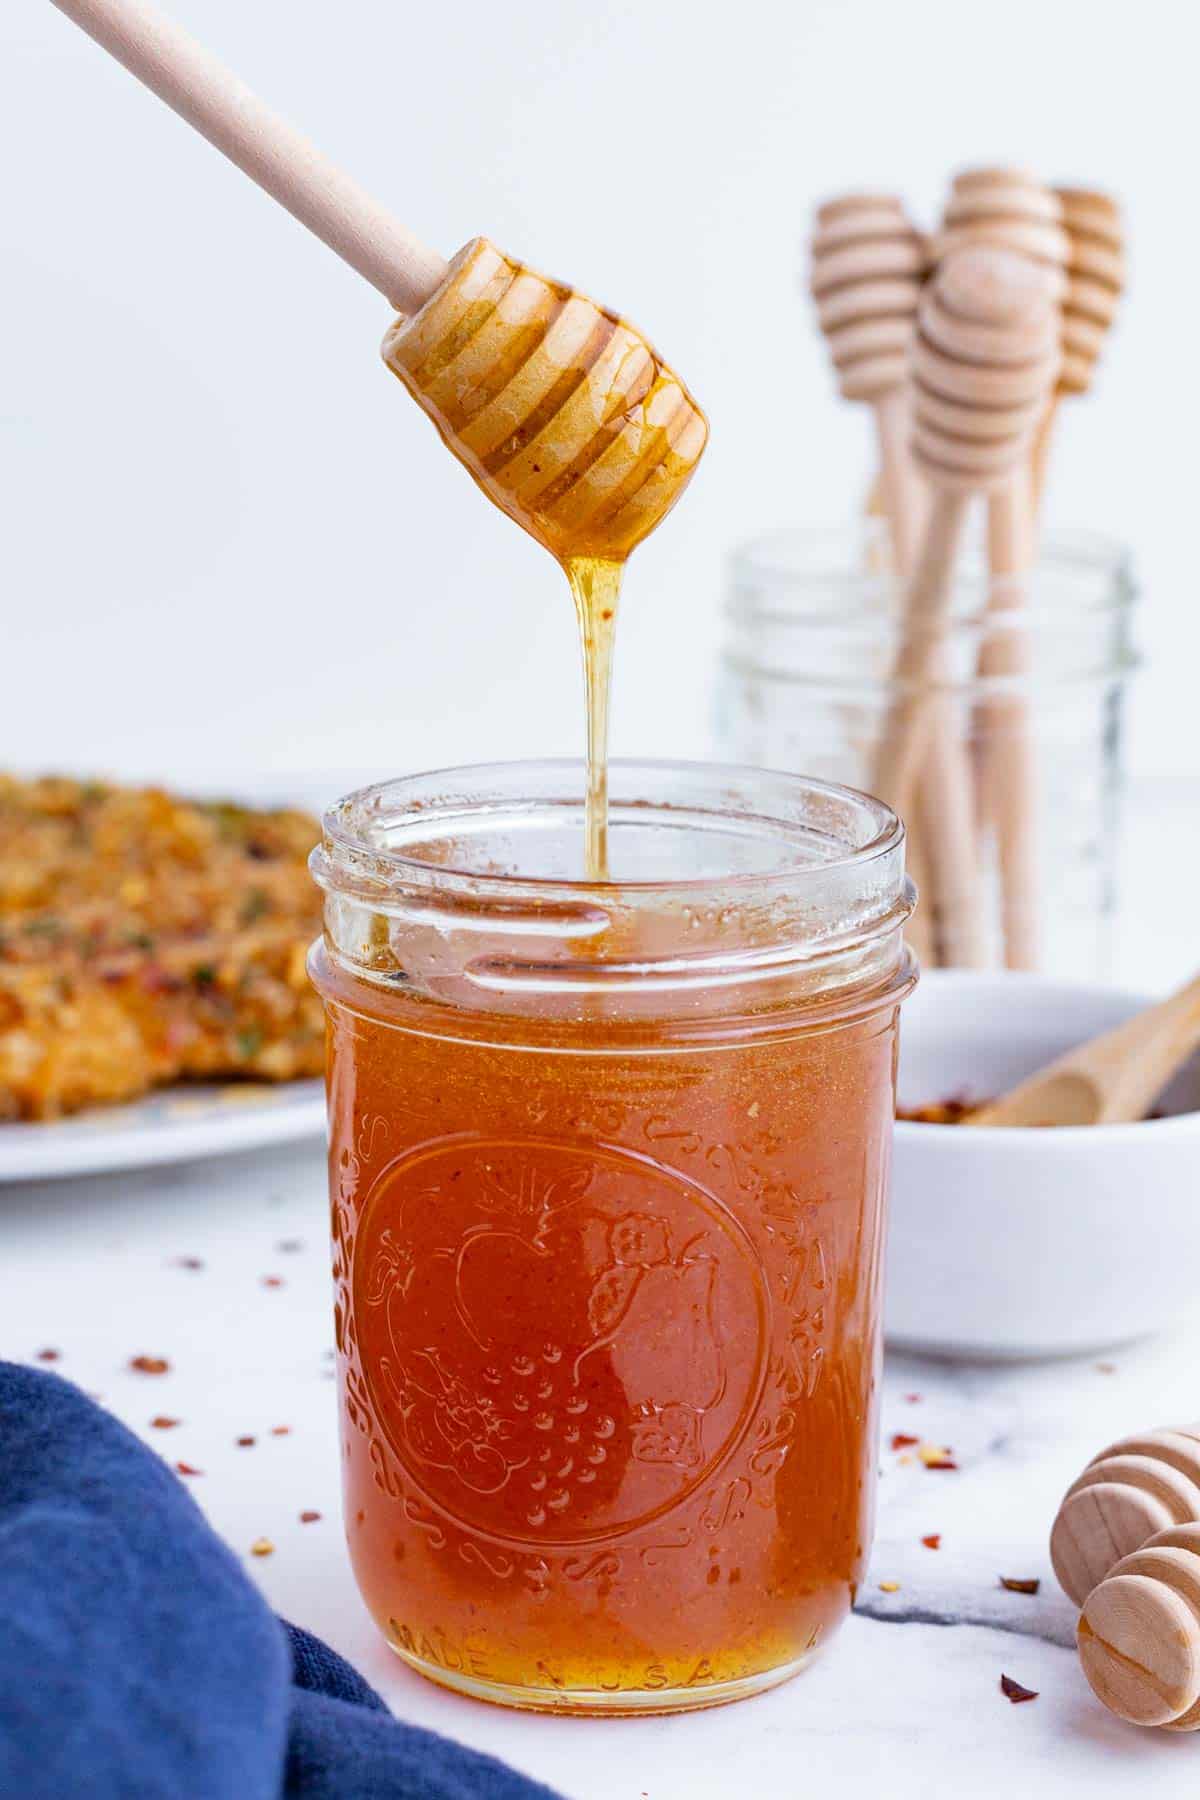 Hot honey is the perfect balance of sweet and spicy to drizzle over chicken, veggies, or even pizza.